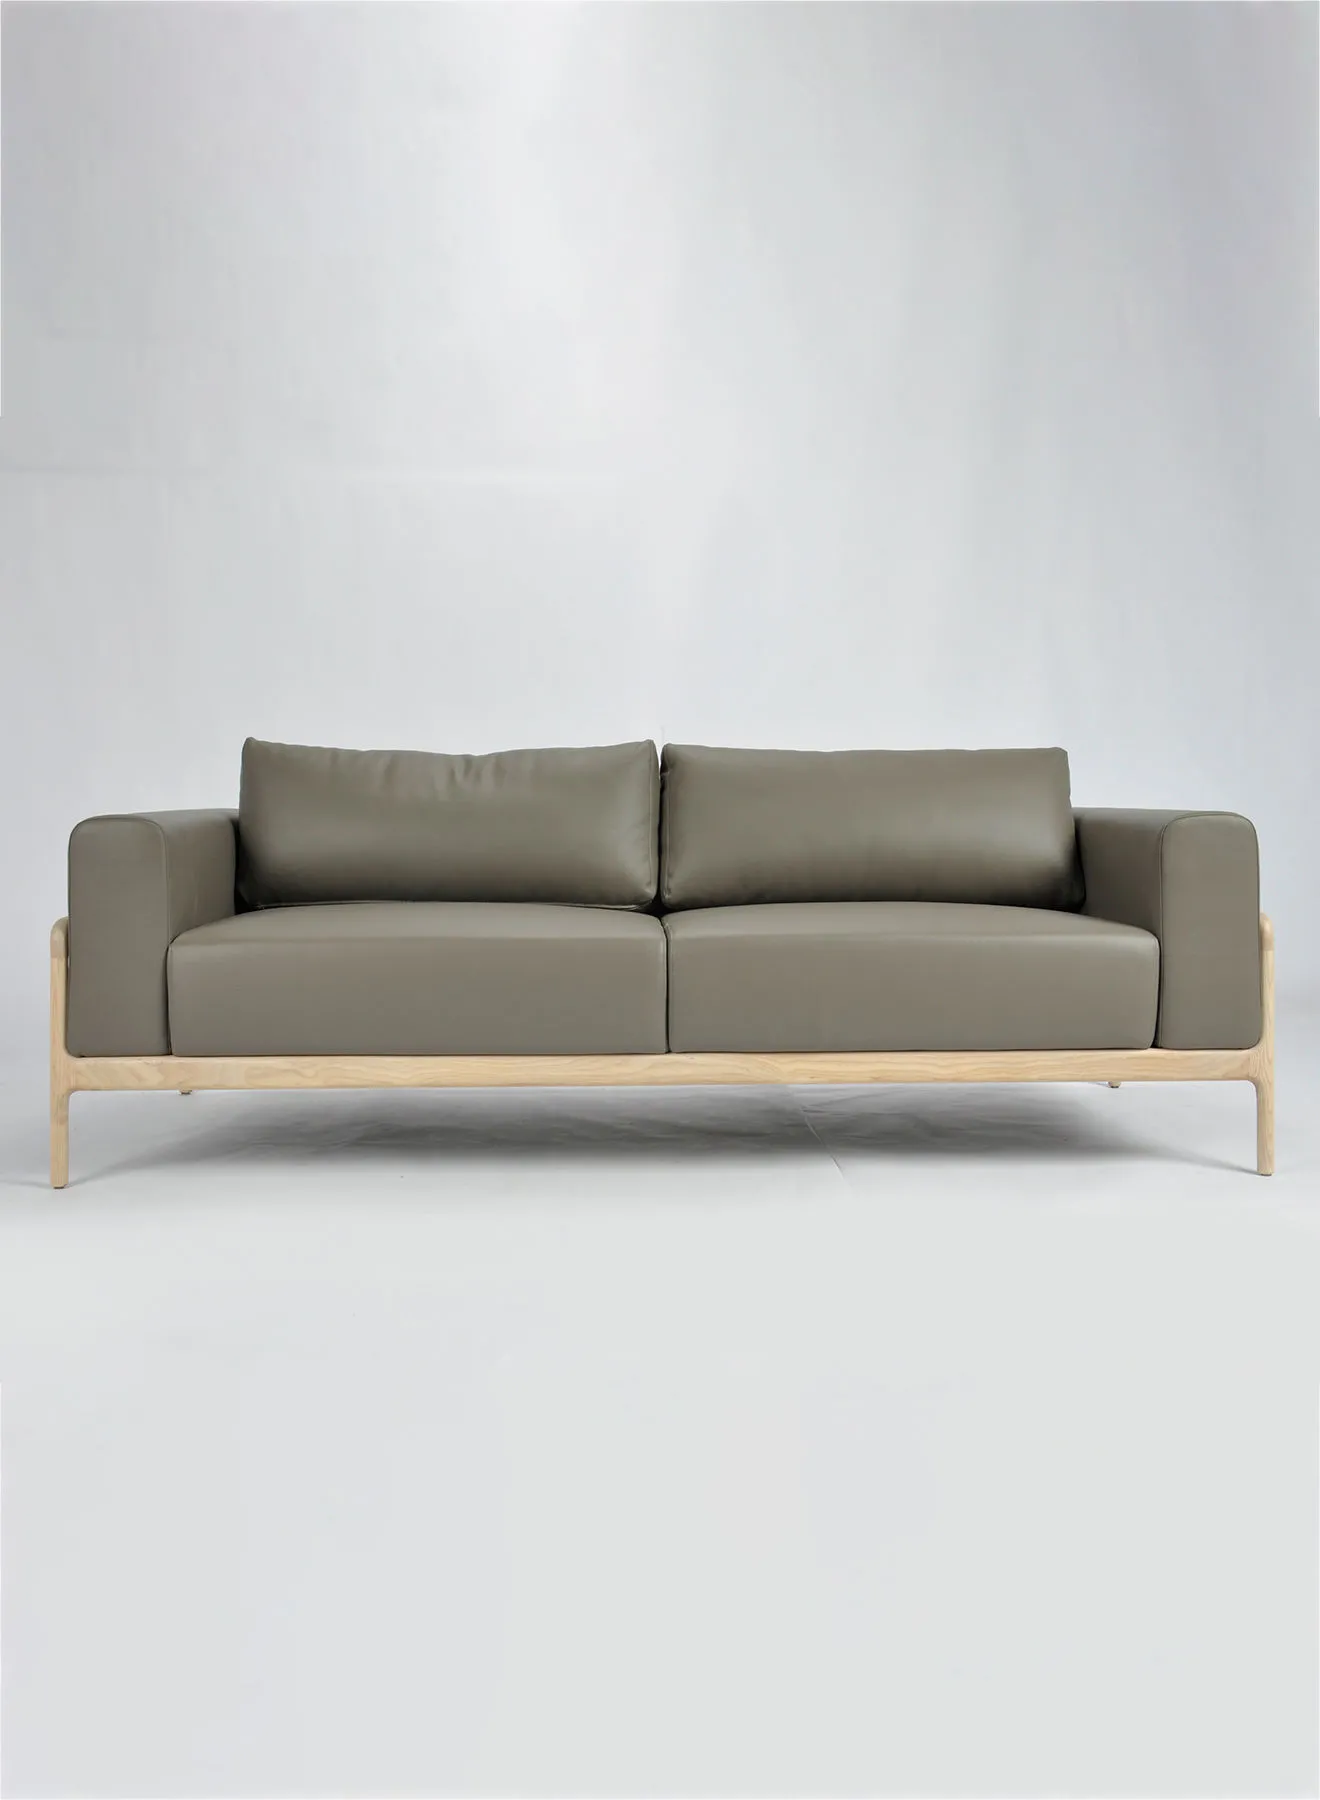 Switch Sofa - Grey Wood Couch - 213X88X70 - 2 Seater Sofa Relaxing Sofa